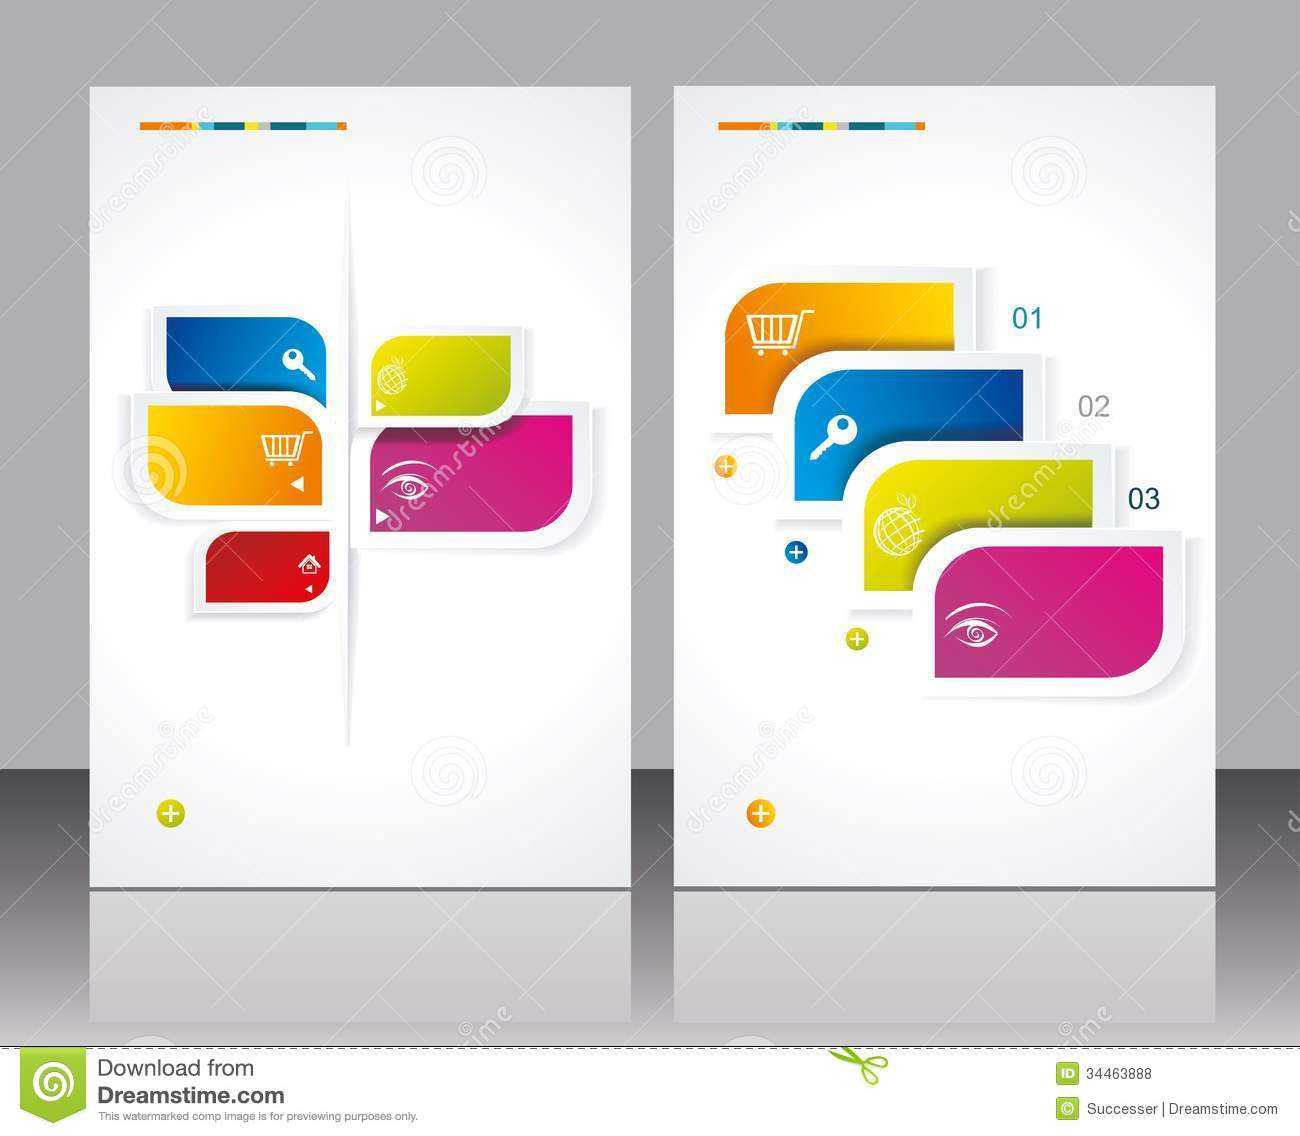 12 Free Vector Brochure Templates Images – Business Brochure Throughout Creative Brochure Templates Free Download